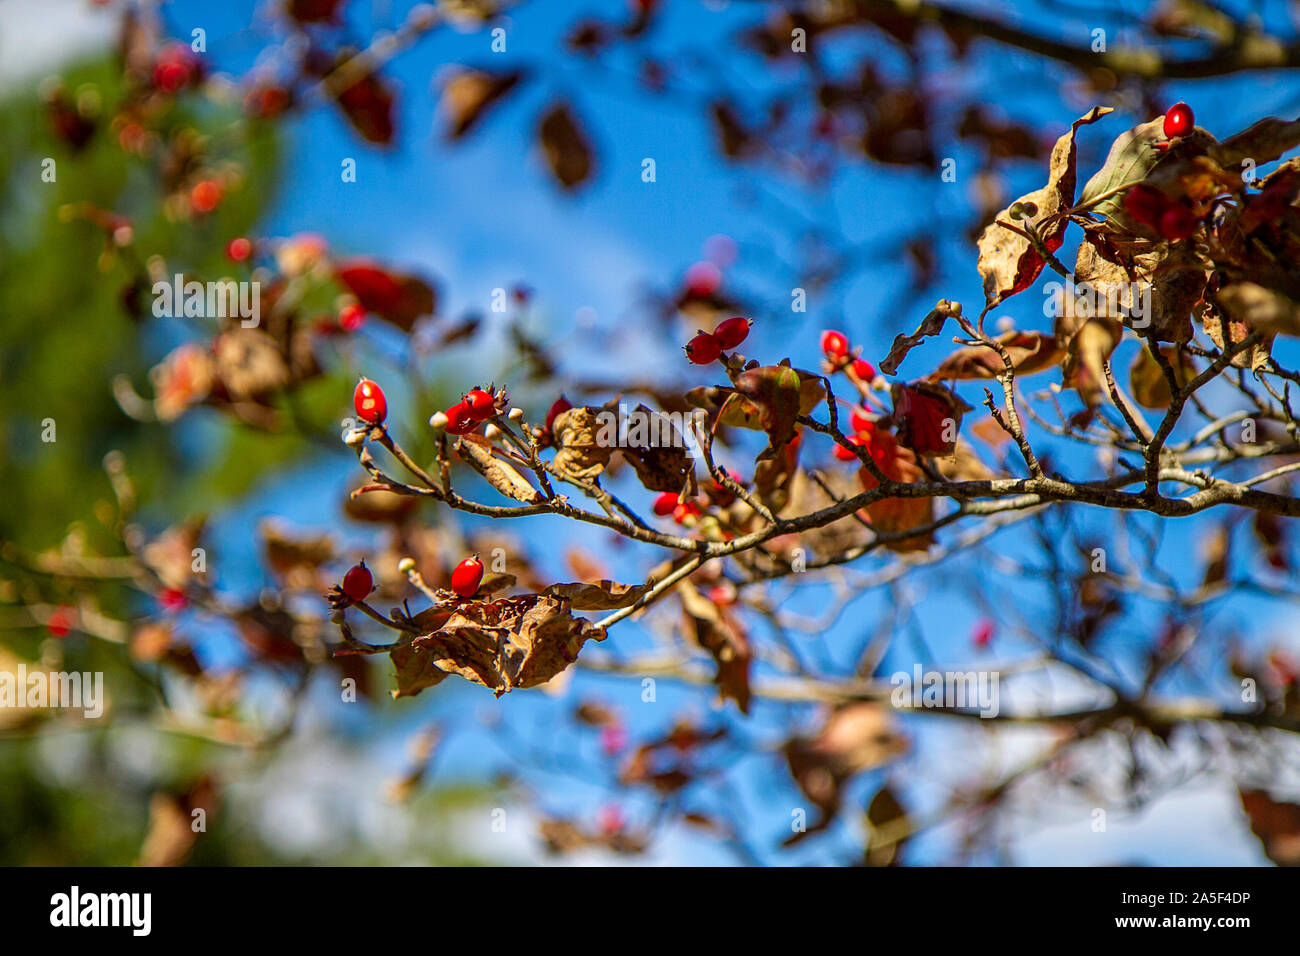 Apple tree in fall season with leaves drying up yet red bright berries take the focus. Stock Photo